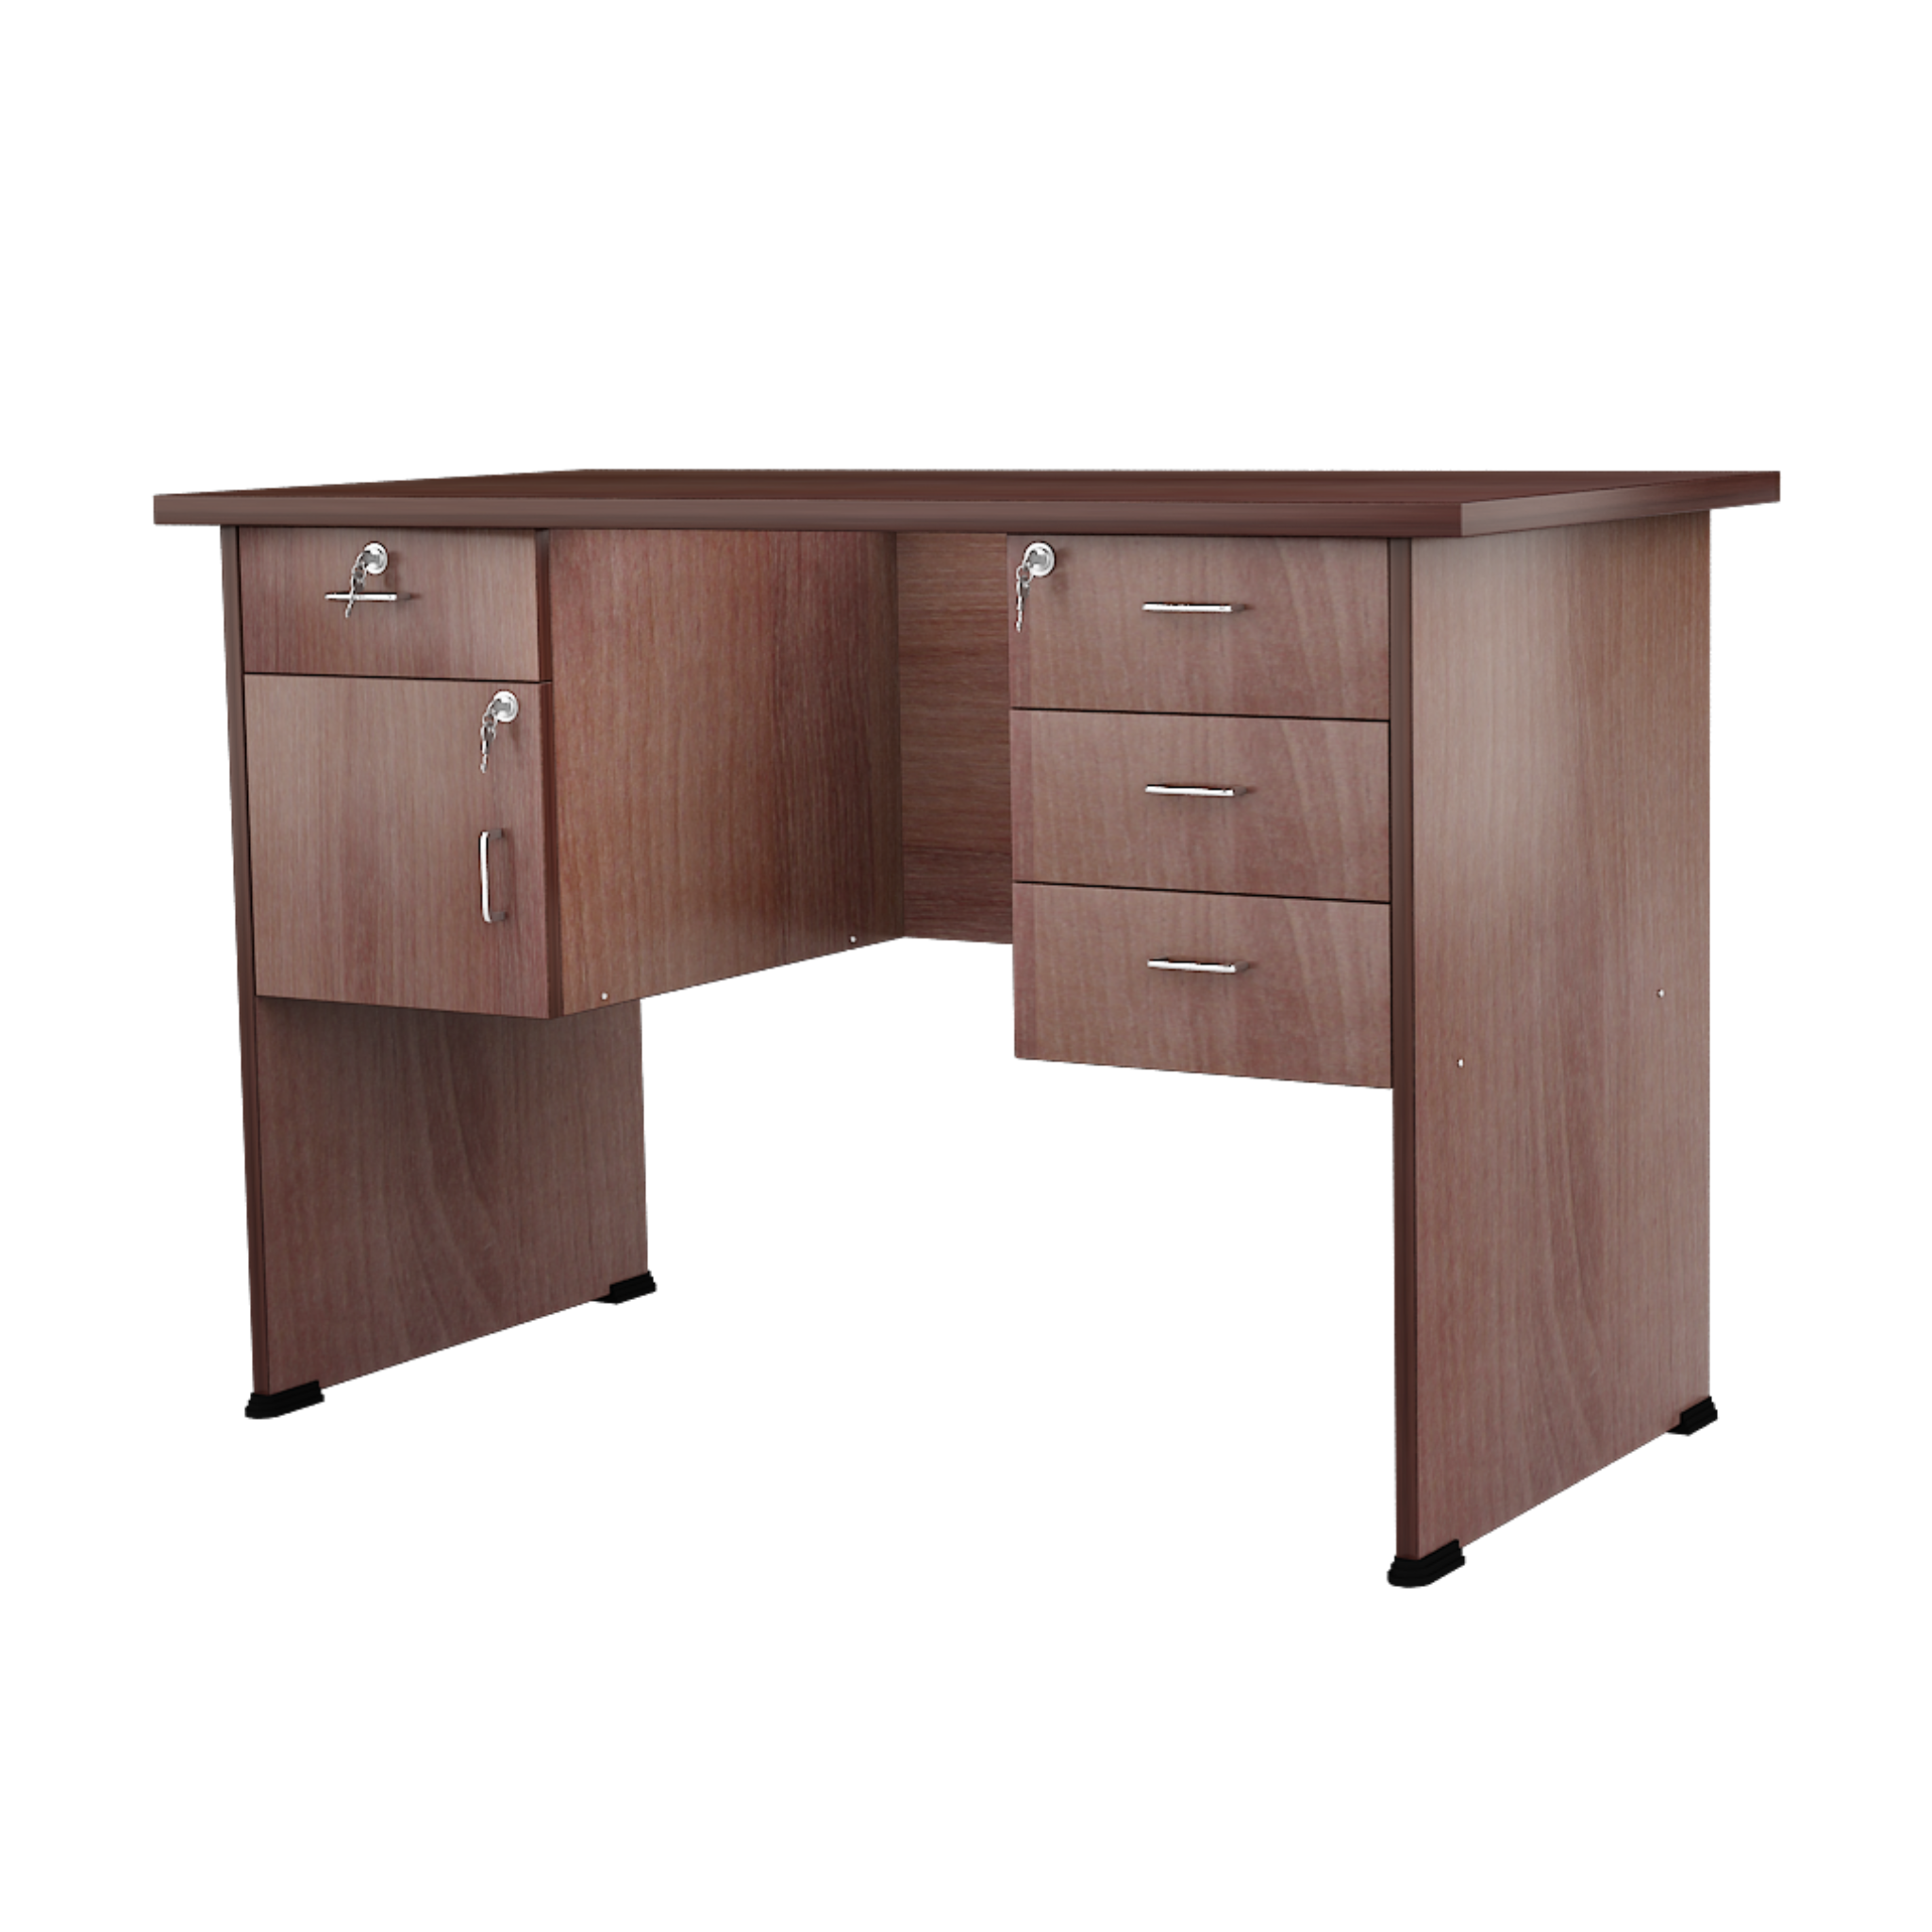 Executive Desk with Drawer Storage